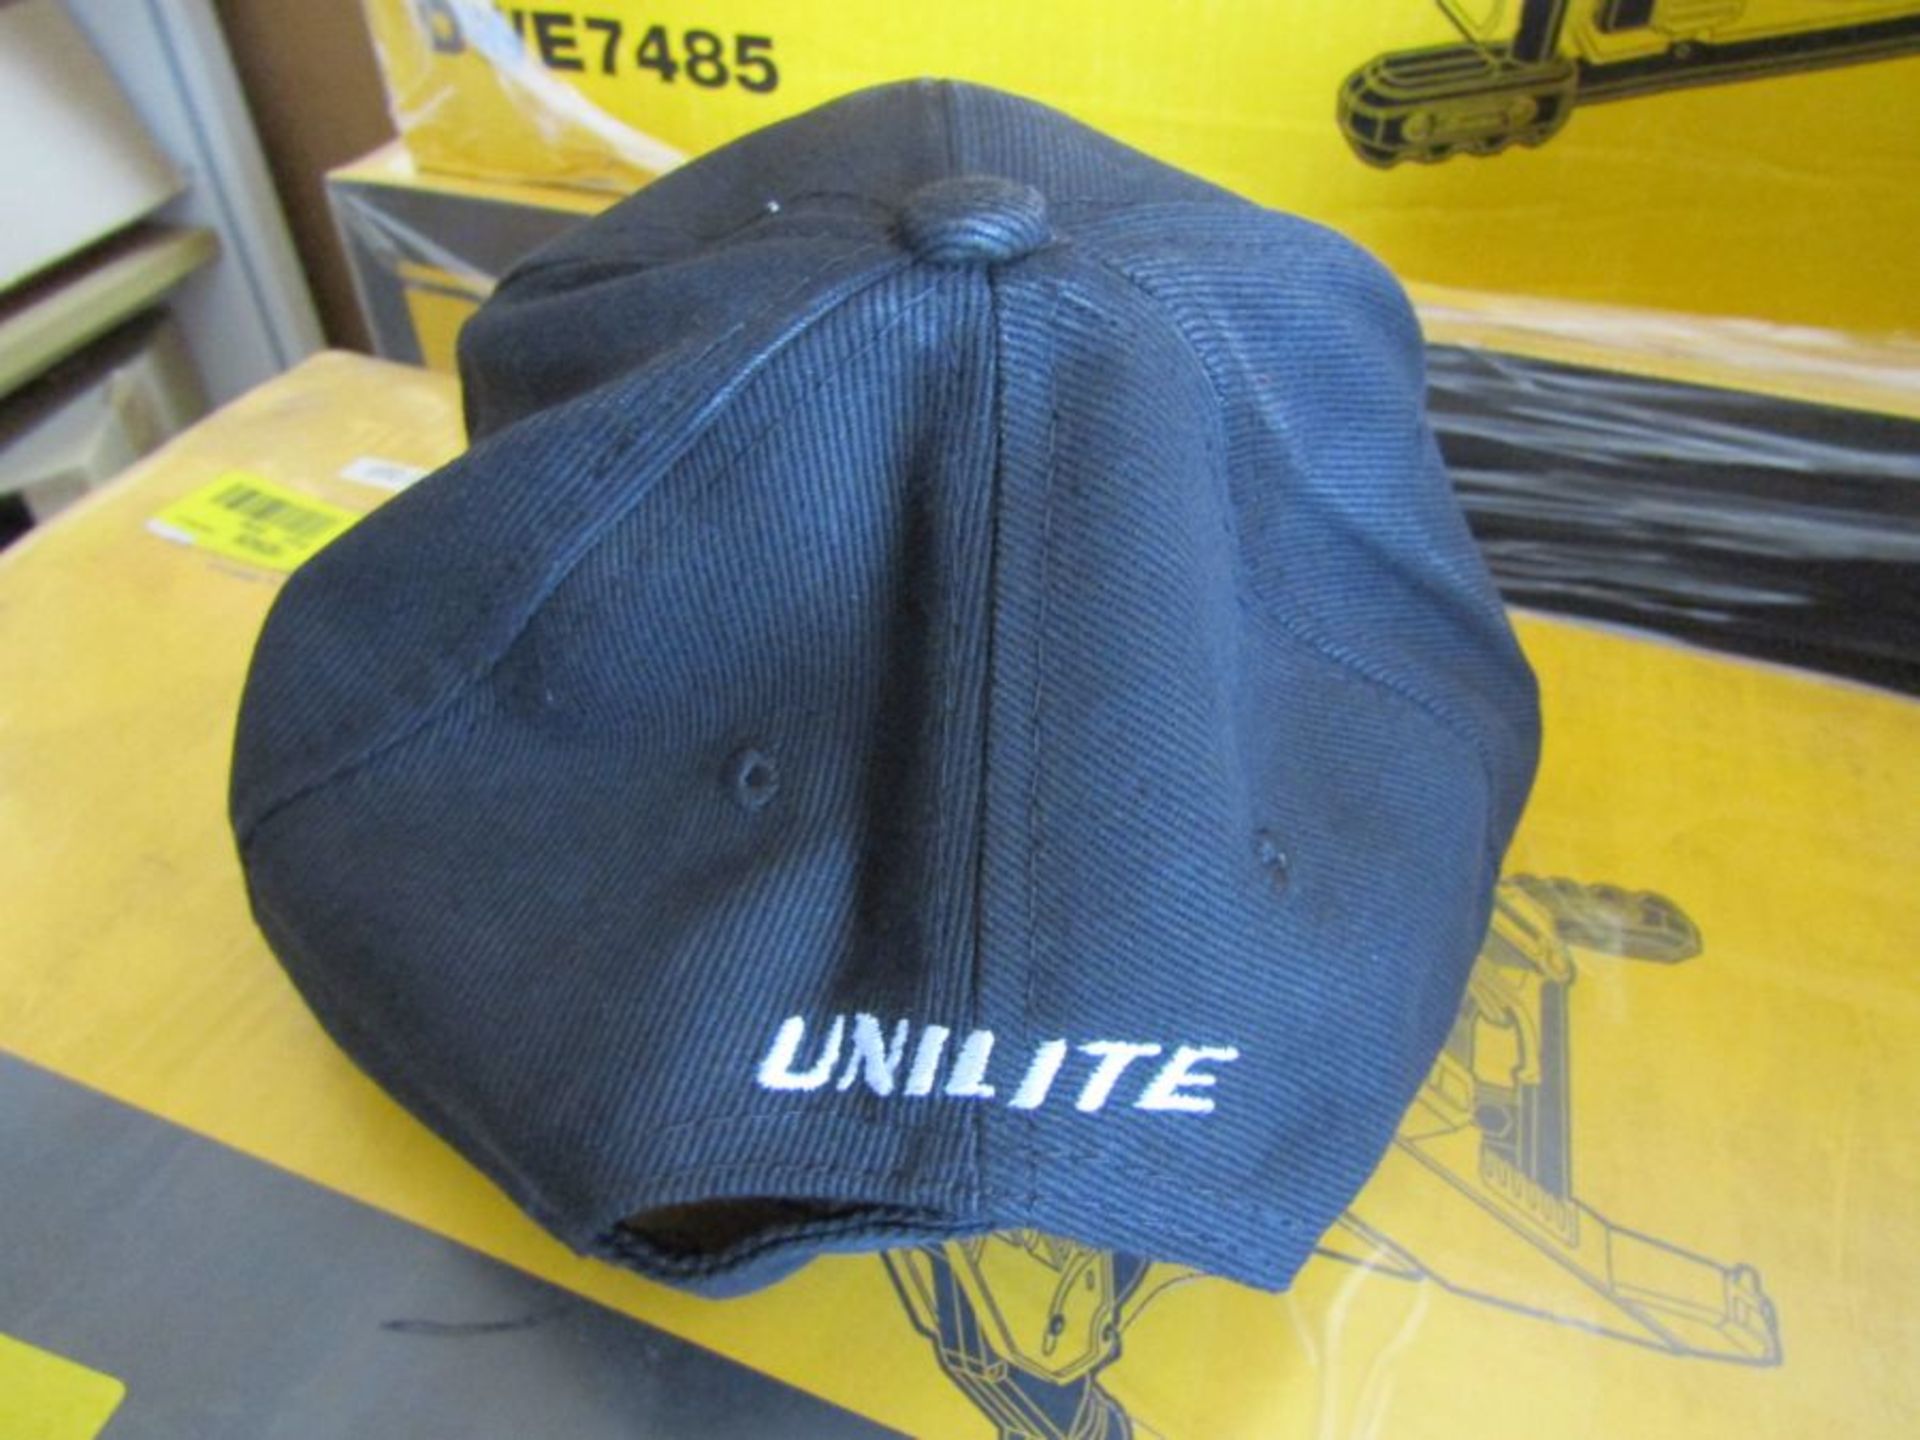 Over 130 Black Baseball Caps with logo as shown - Image 2 of 2